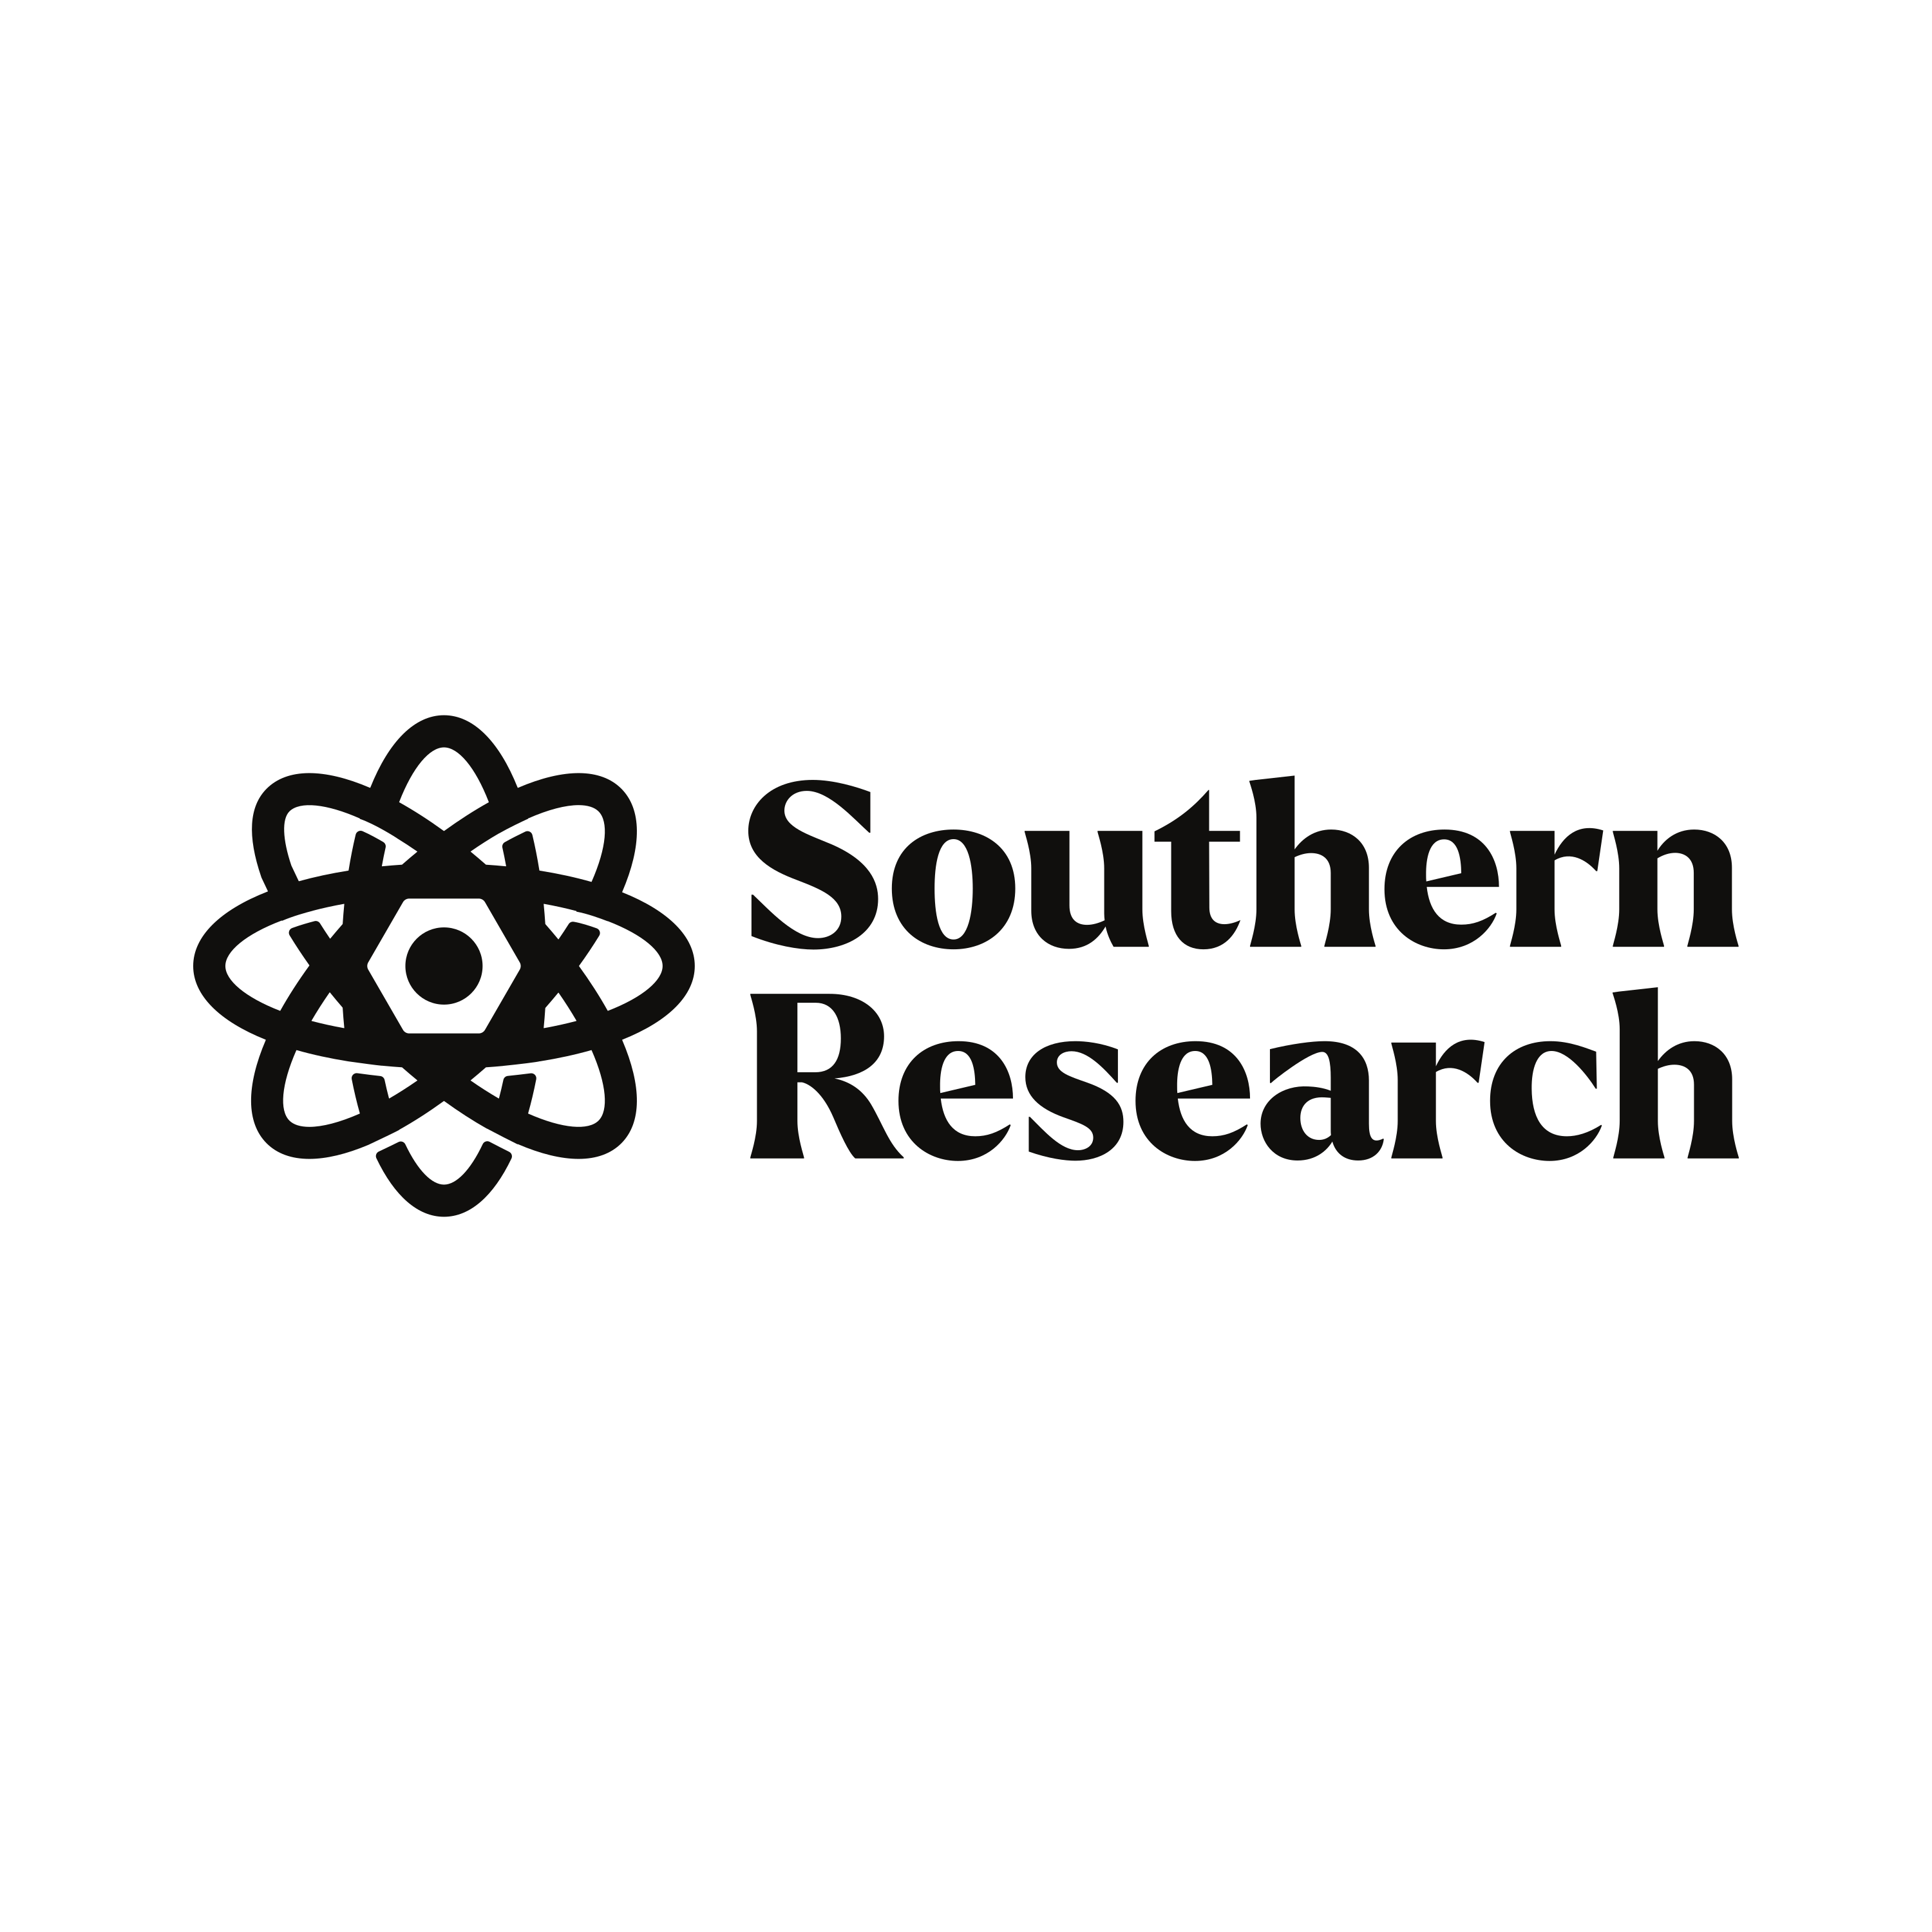 Southern Research Institute logo